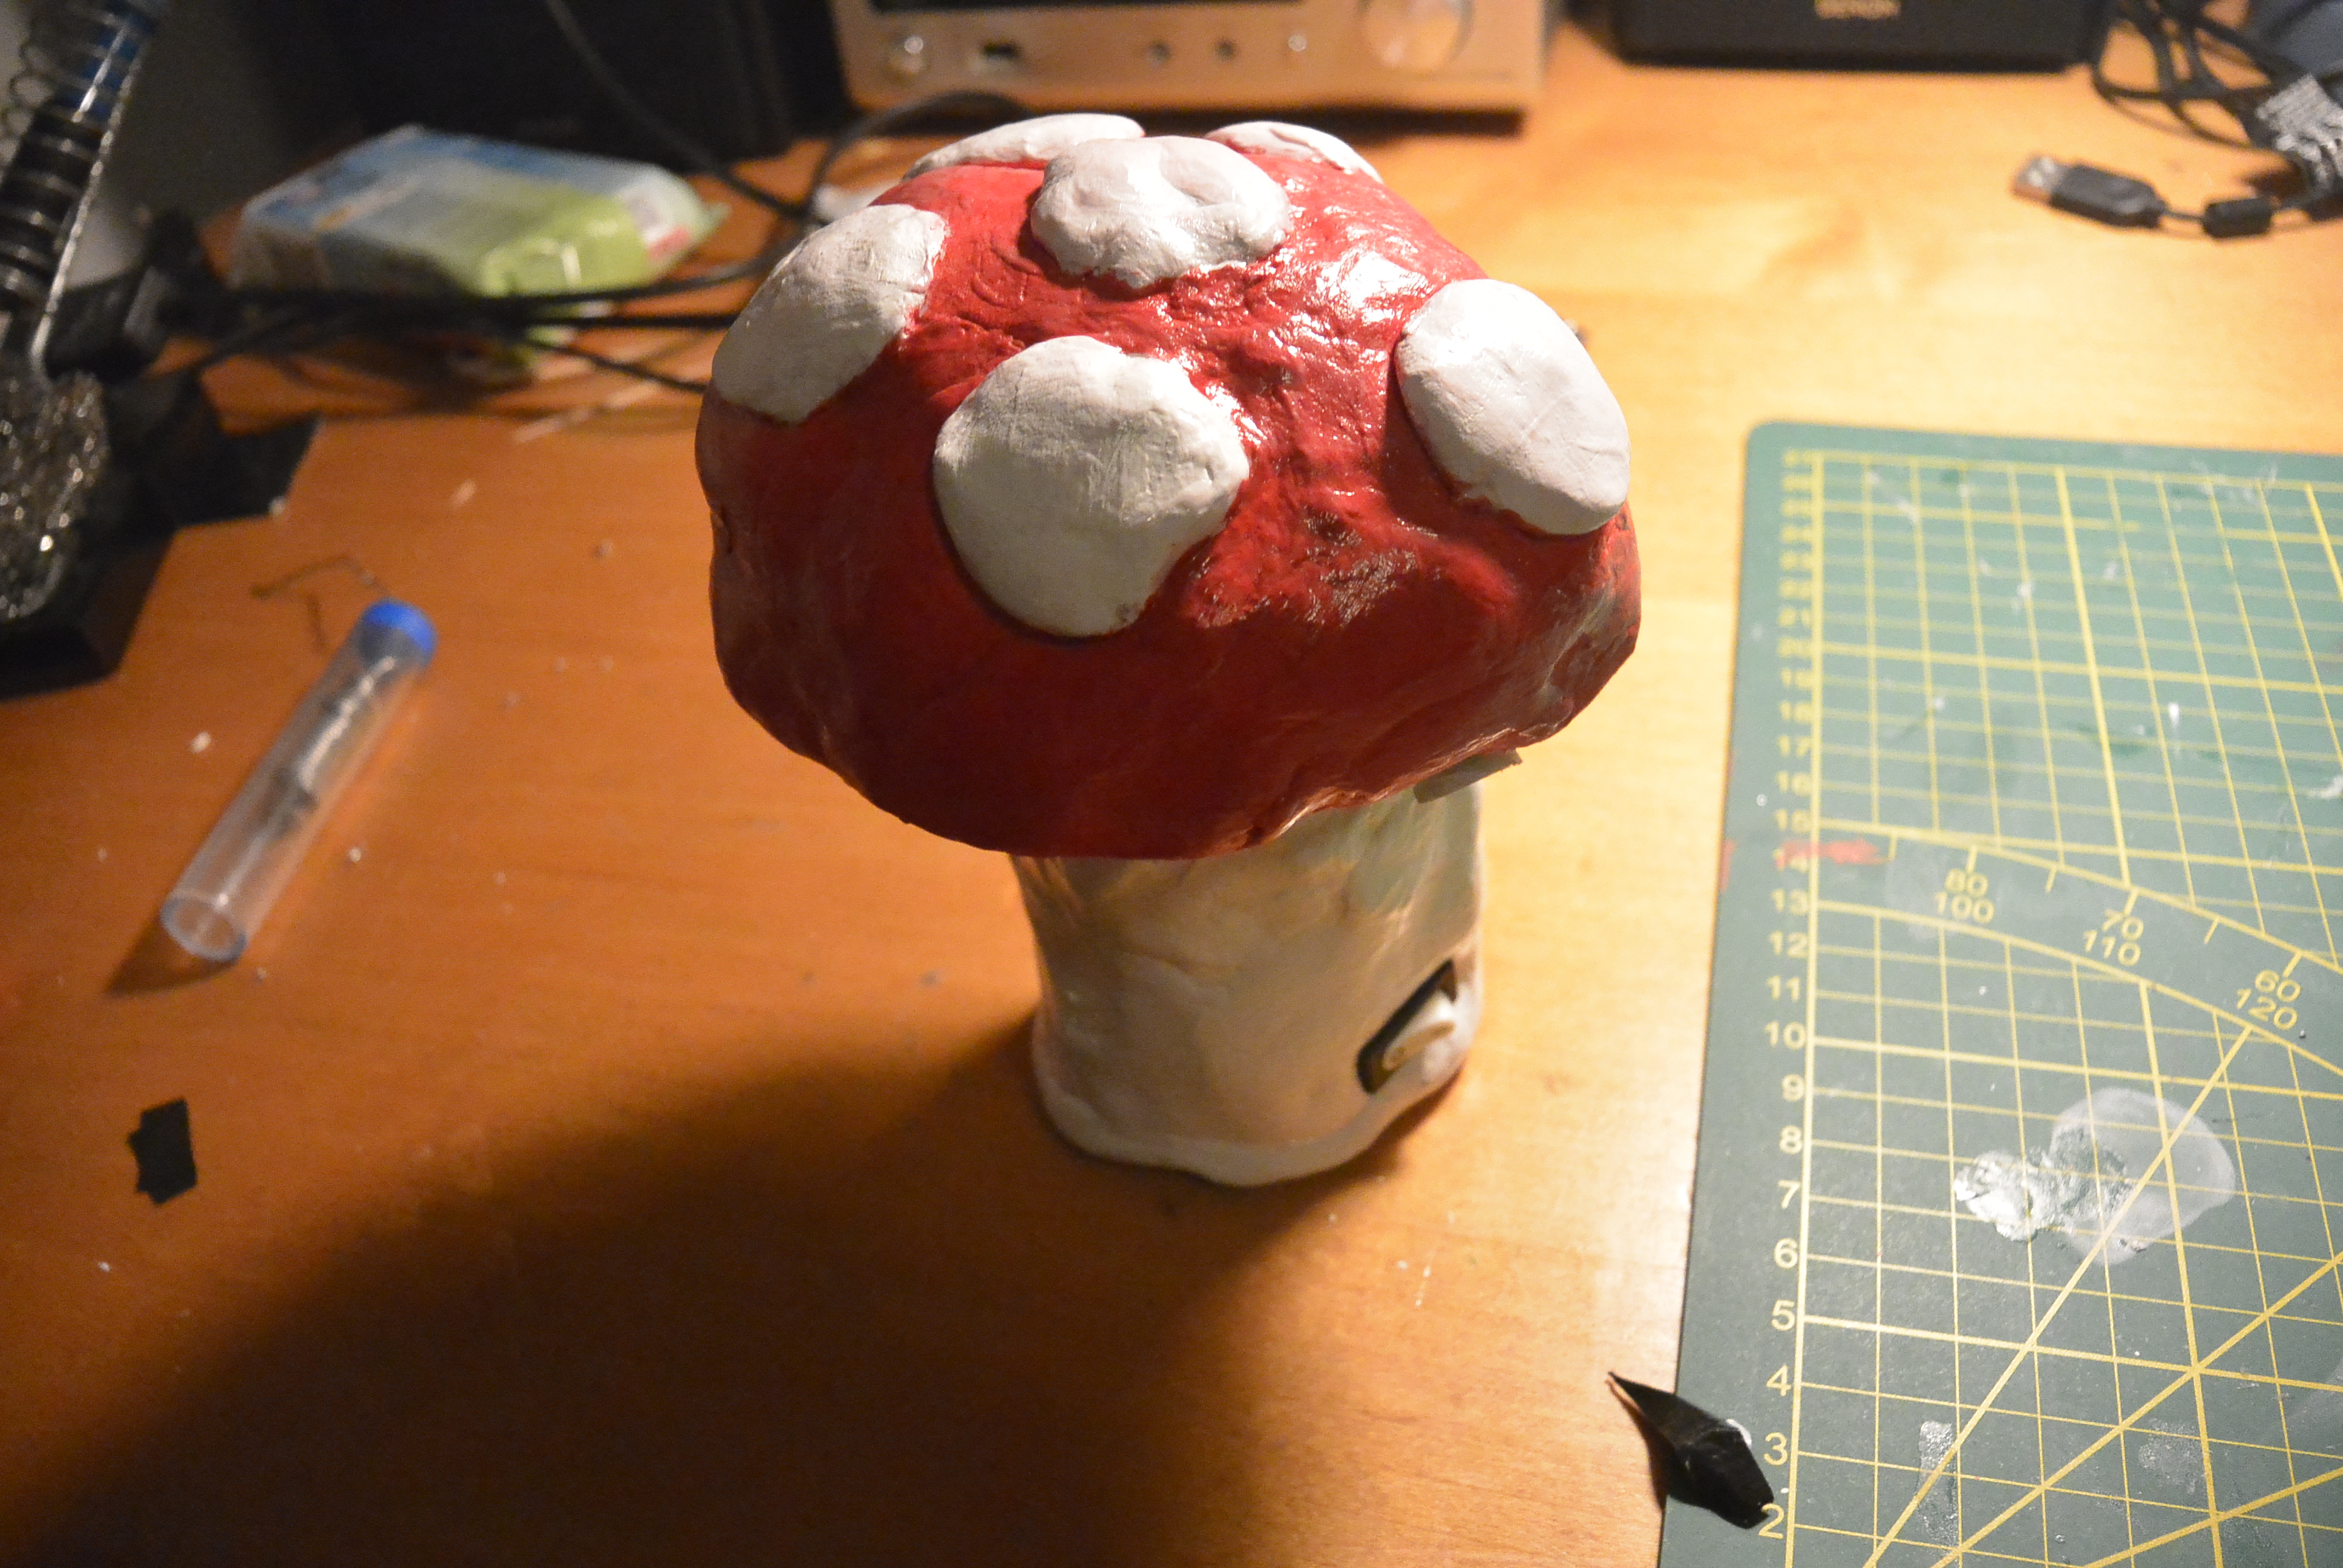 A picture a mushroom lamp finished